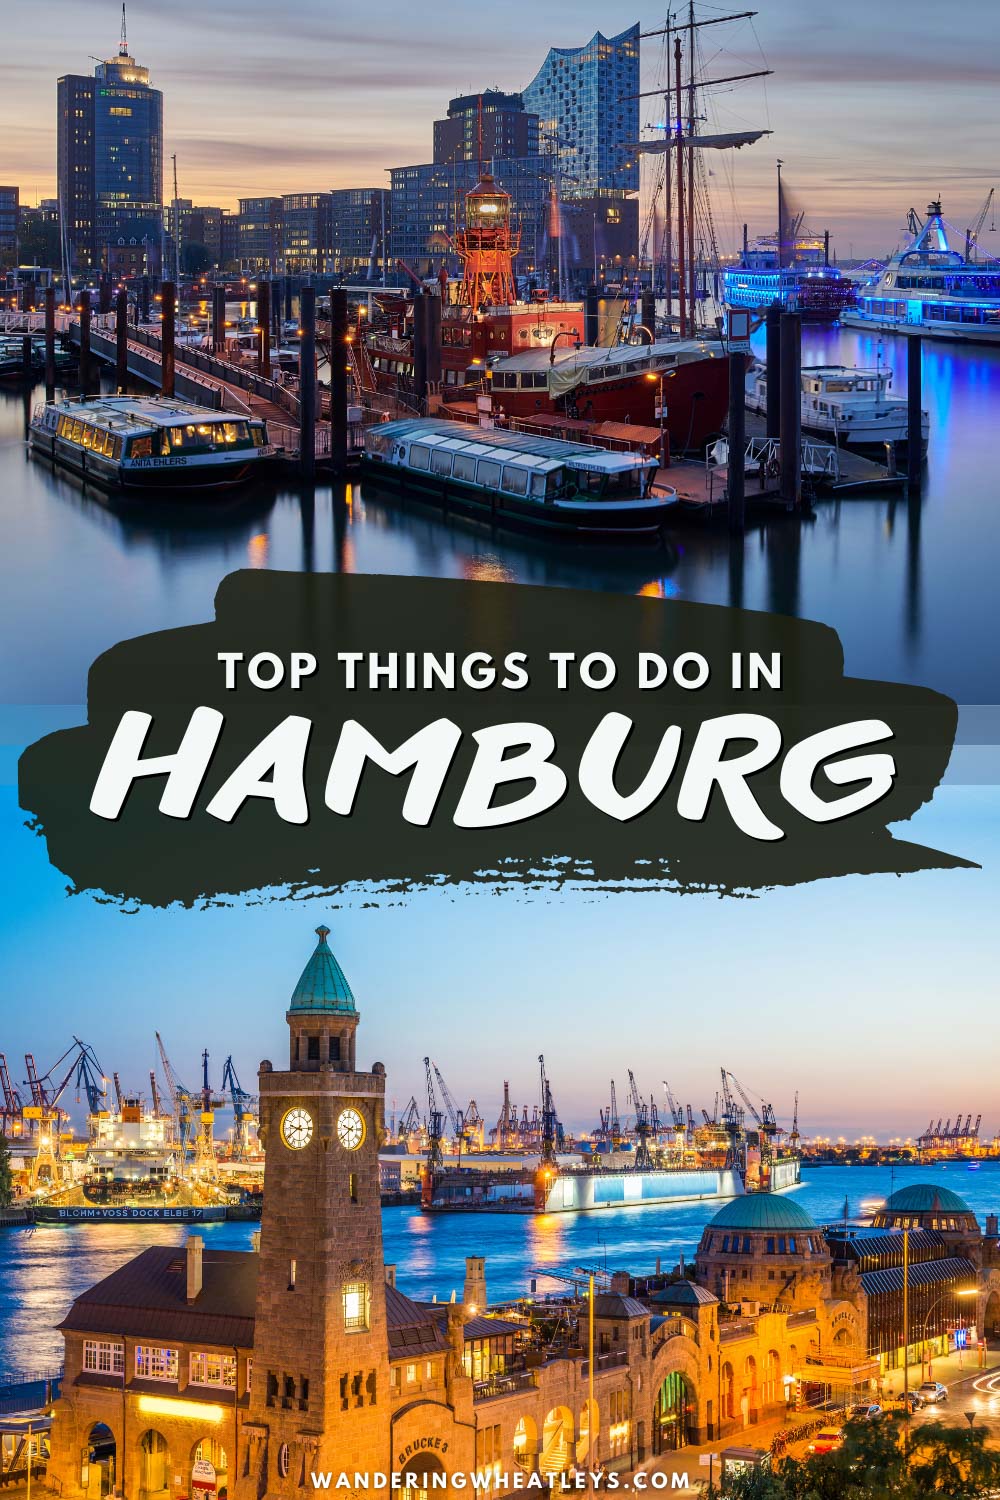 The Best Things to do in Hamburg, Germany